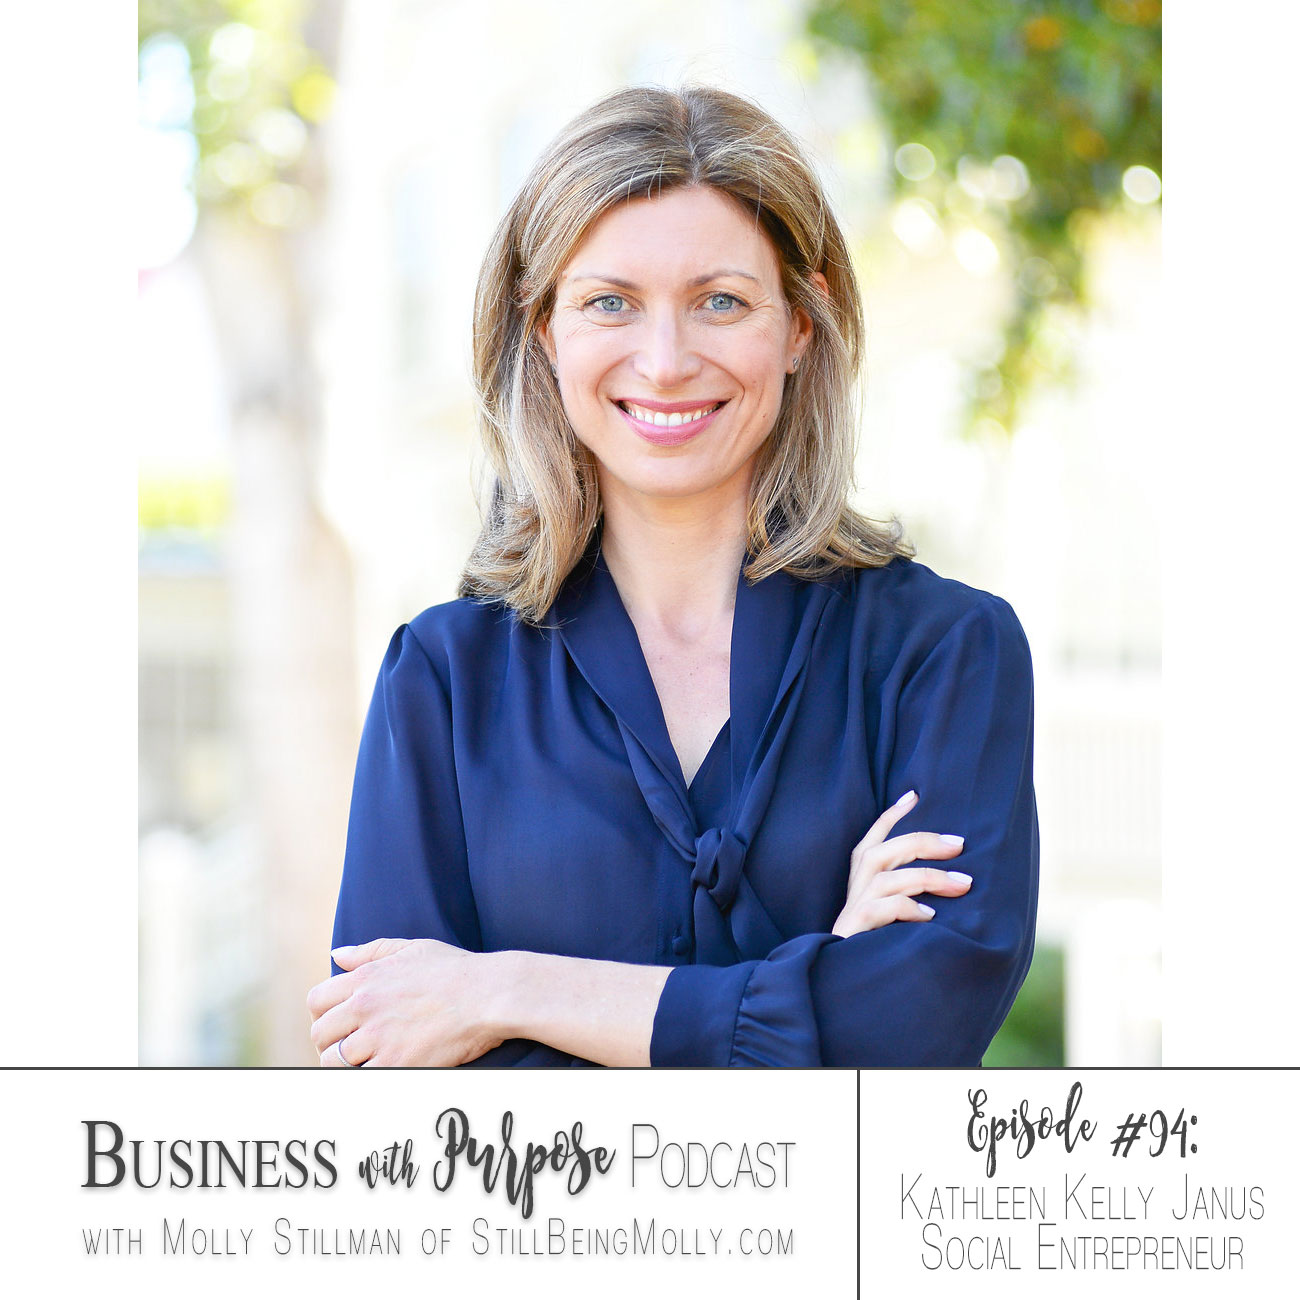 Business with Purpose Podcast EP 95: Kathleen Kelly Janus, Author and Social Entrepreneur